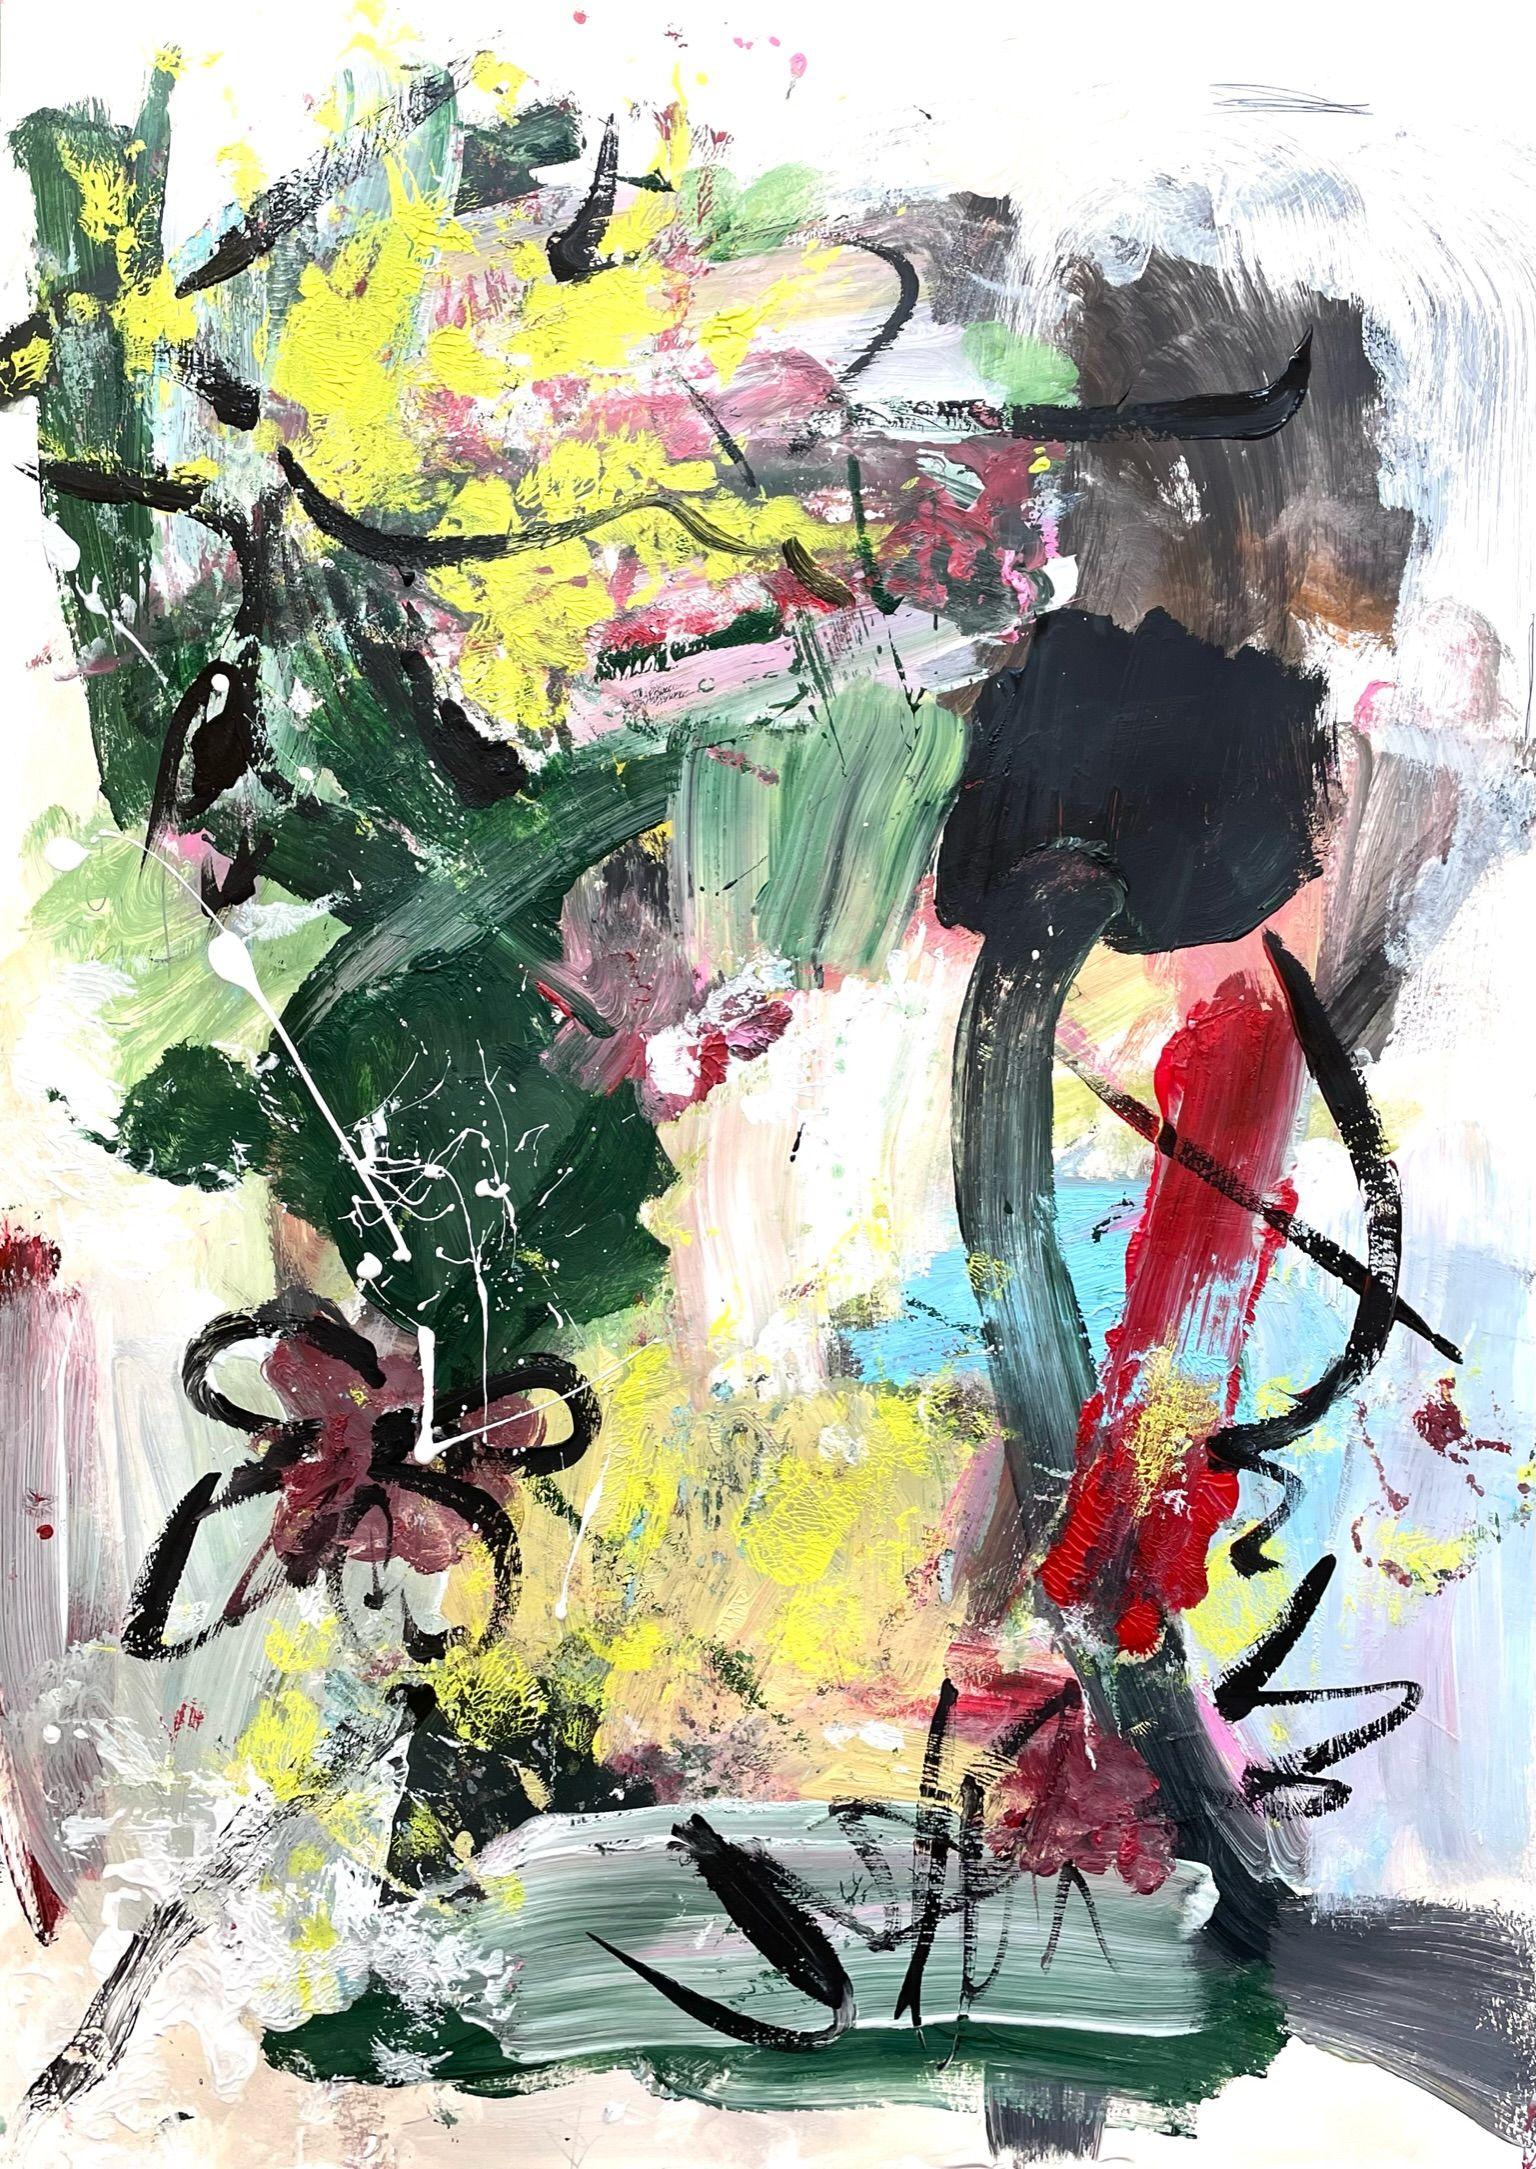   "AMORE" is a vibrant and passionate artwork on paper. It is full of movement and action. Lively at it's best. Just as love gives us wings.    The main colors are green, yellow, black, red and light blue.     The artwork must be framed. Signed and